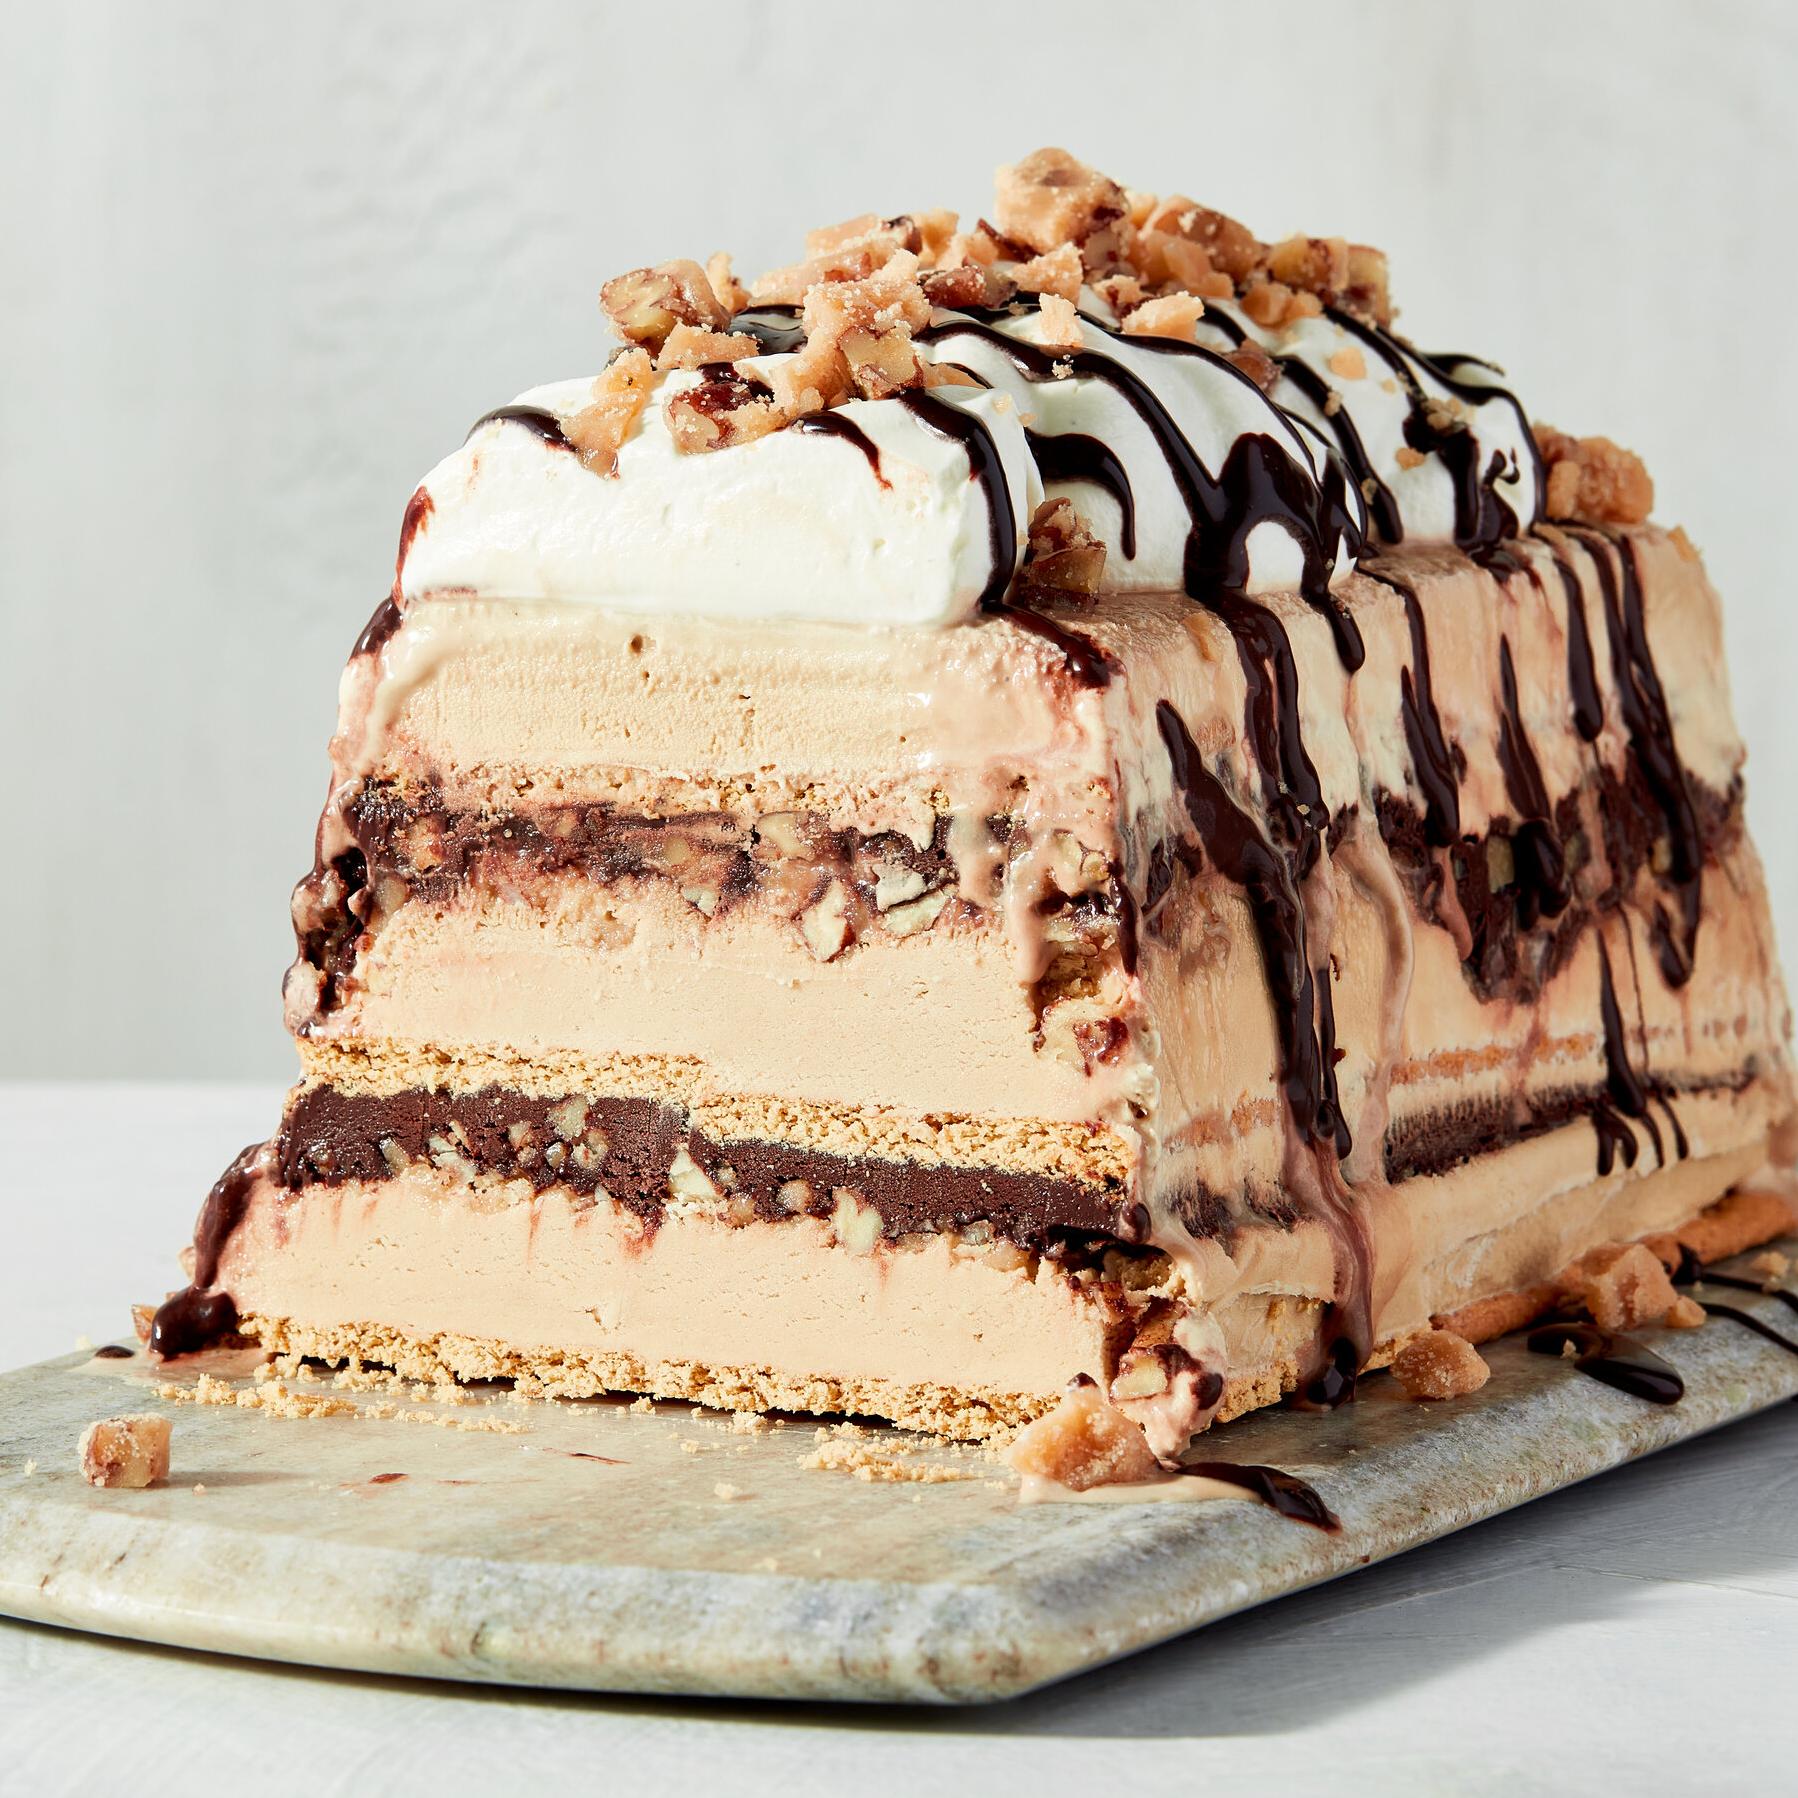  I'm telling you, this Coffee and Cream Icebox Cake is simply perfection. ❤️